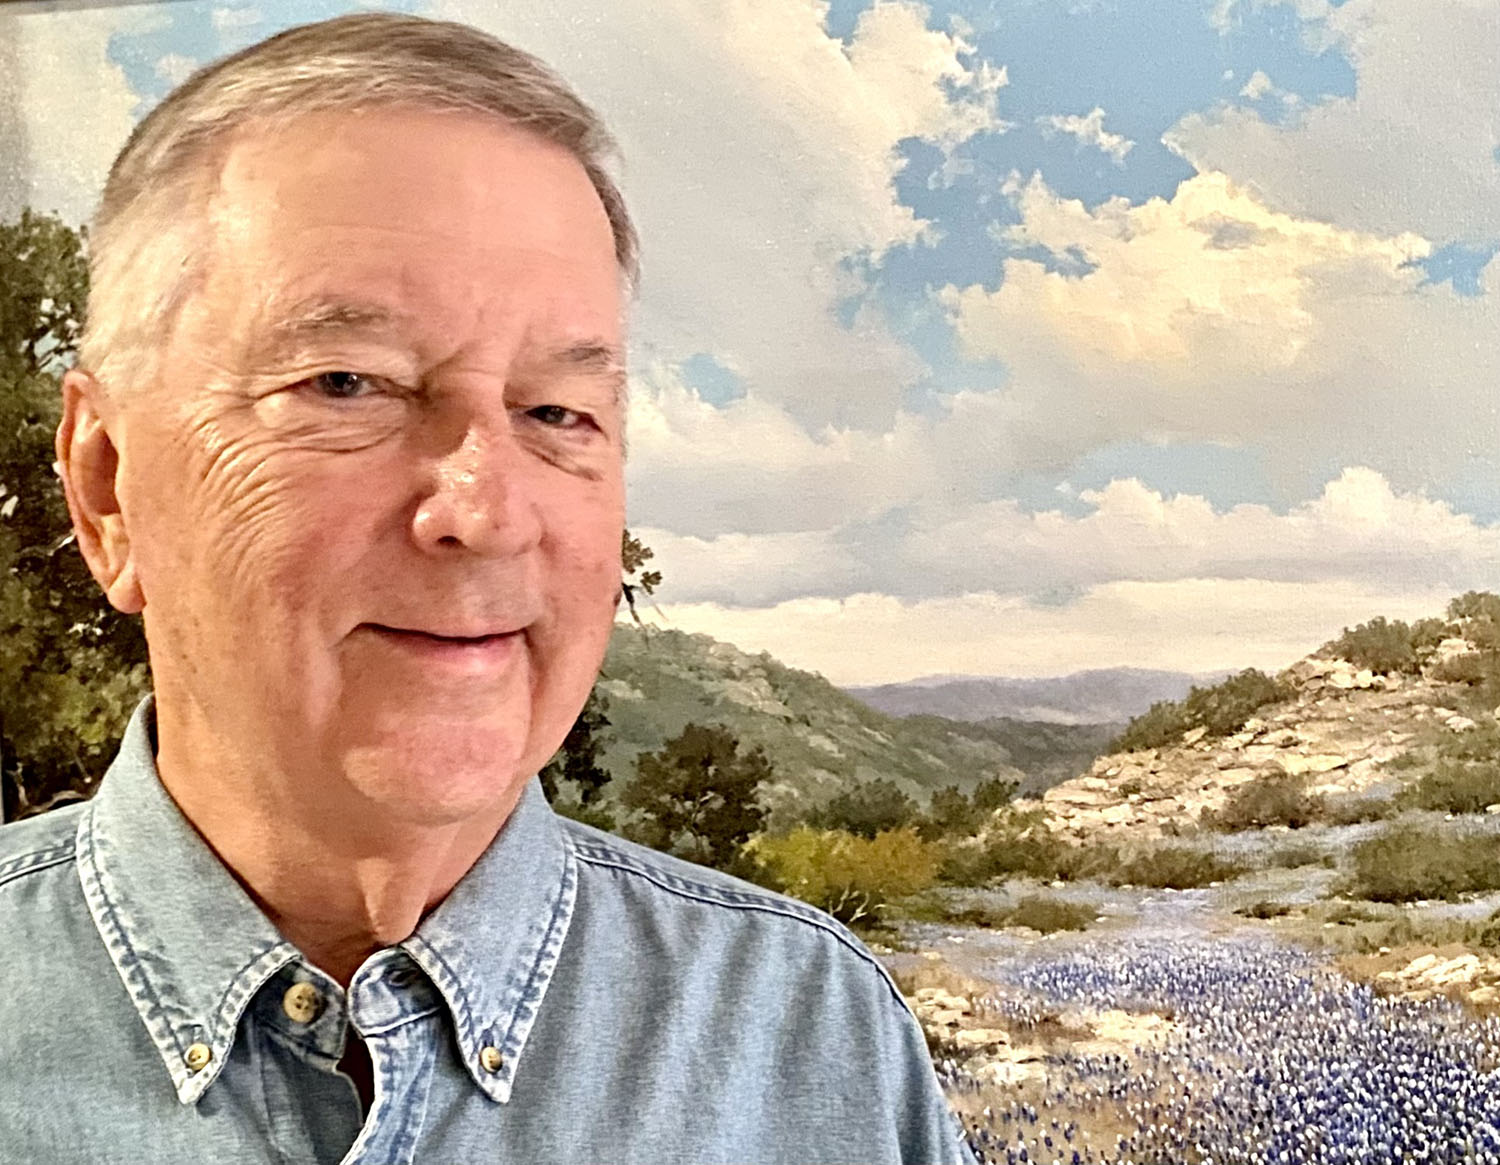 A picture of the author in front of a painting of bluebonnets